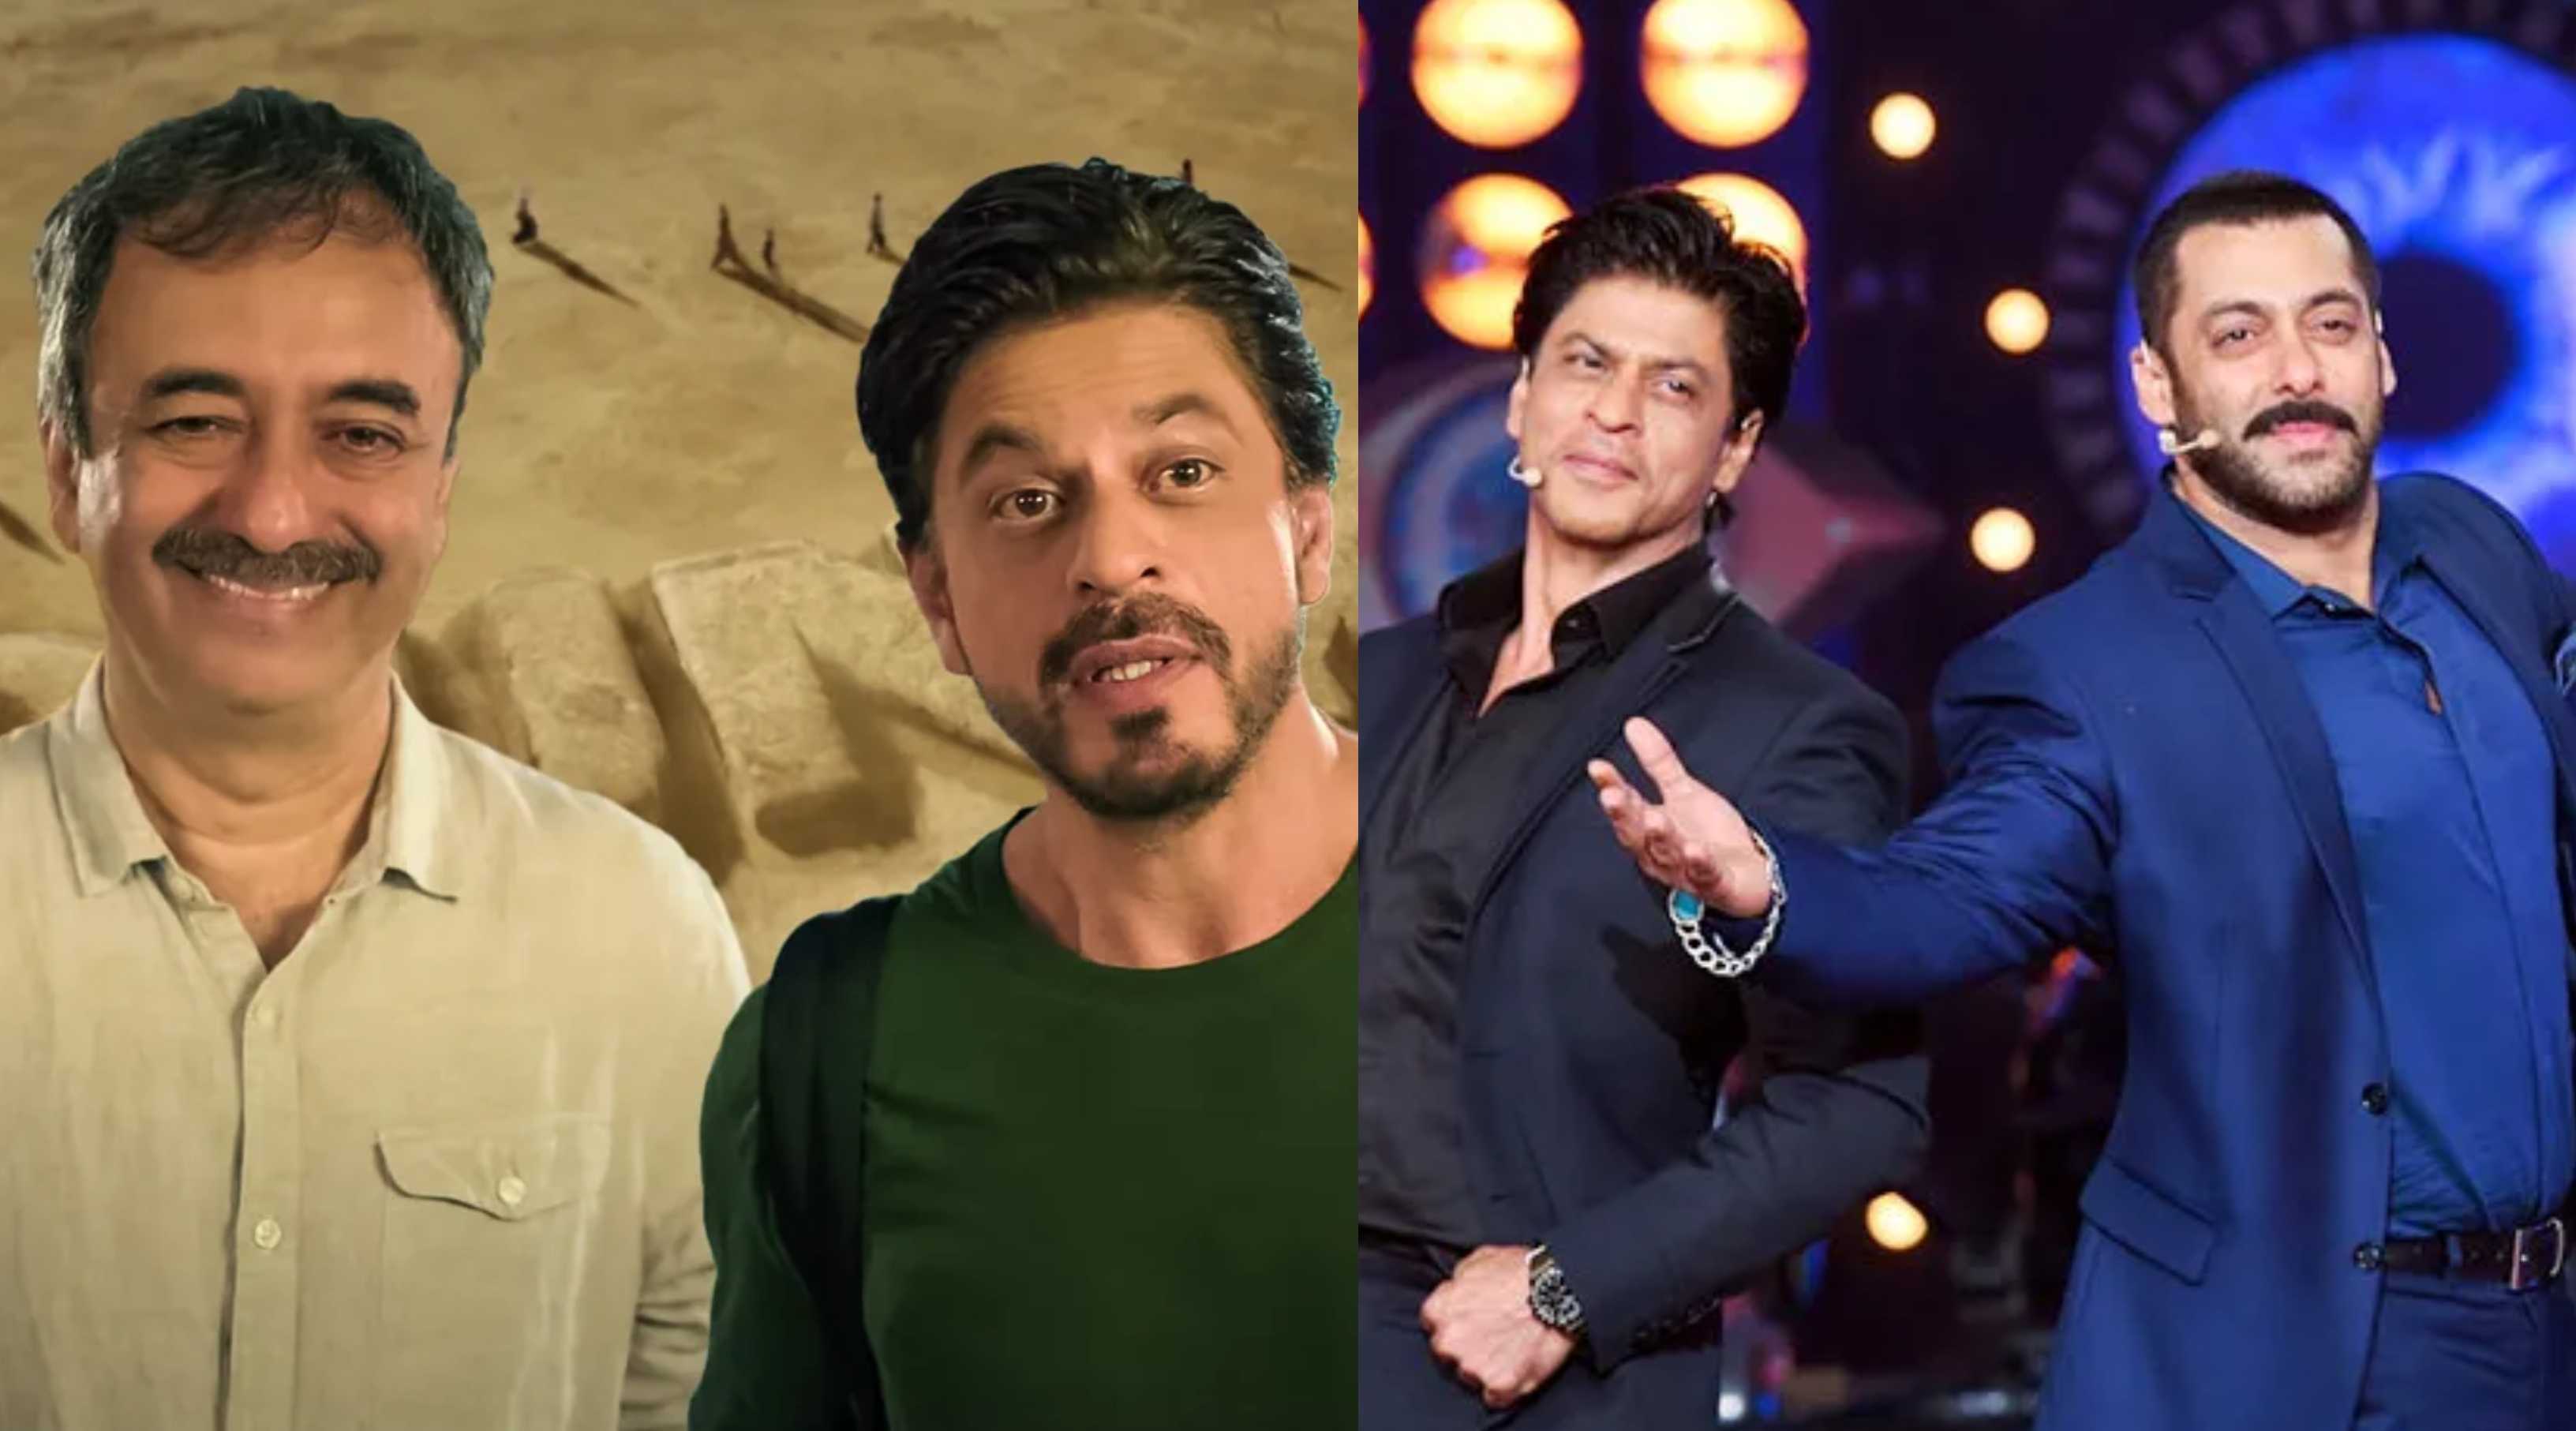 Shah Rukh Khan to announce title of Atlee’s film soon; will join Salman Khan for Tiger 3 after Dunki